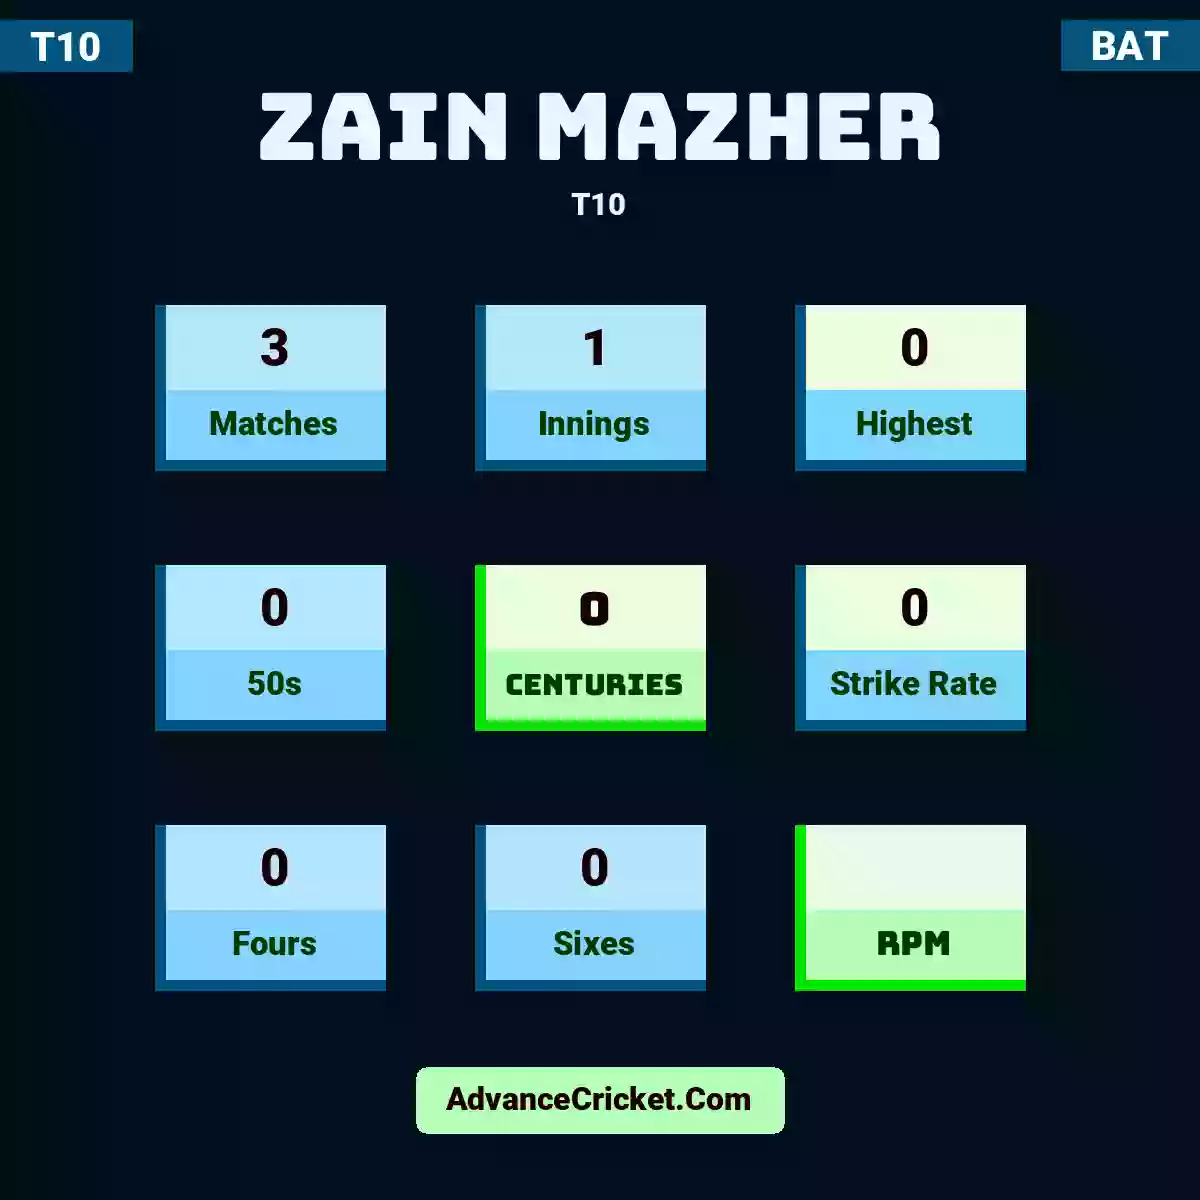 Zain Mazher T10 , Zain Mazher played 3 matches, scored 0 runs as highest, 0 half-centuries, and 0 centuries, with a strike rate of 0. Z.Mazher hit 0 fours and 0 sixes.